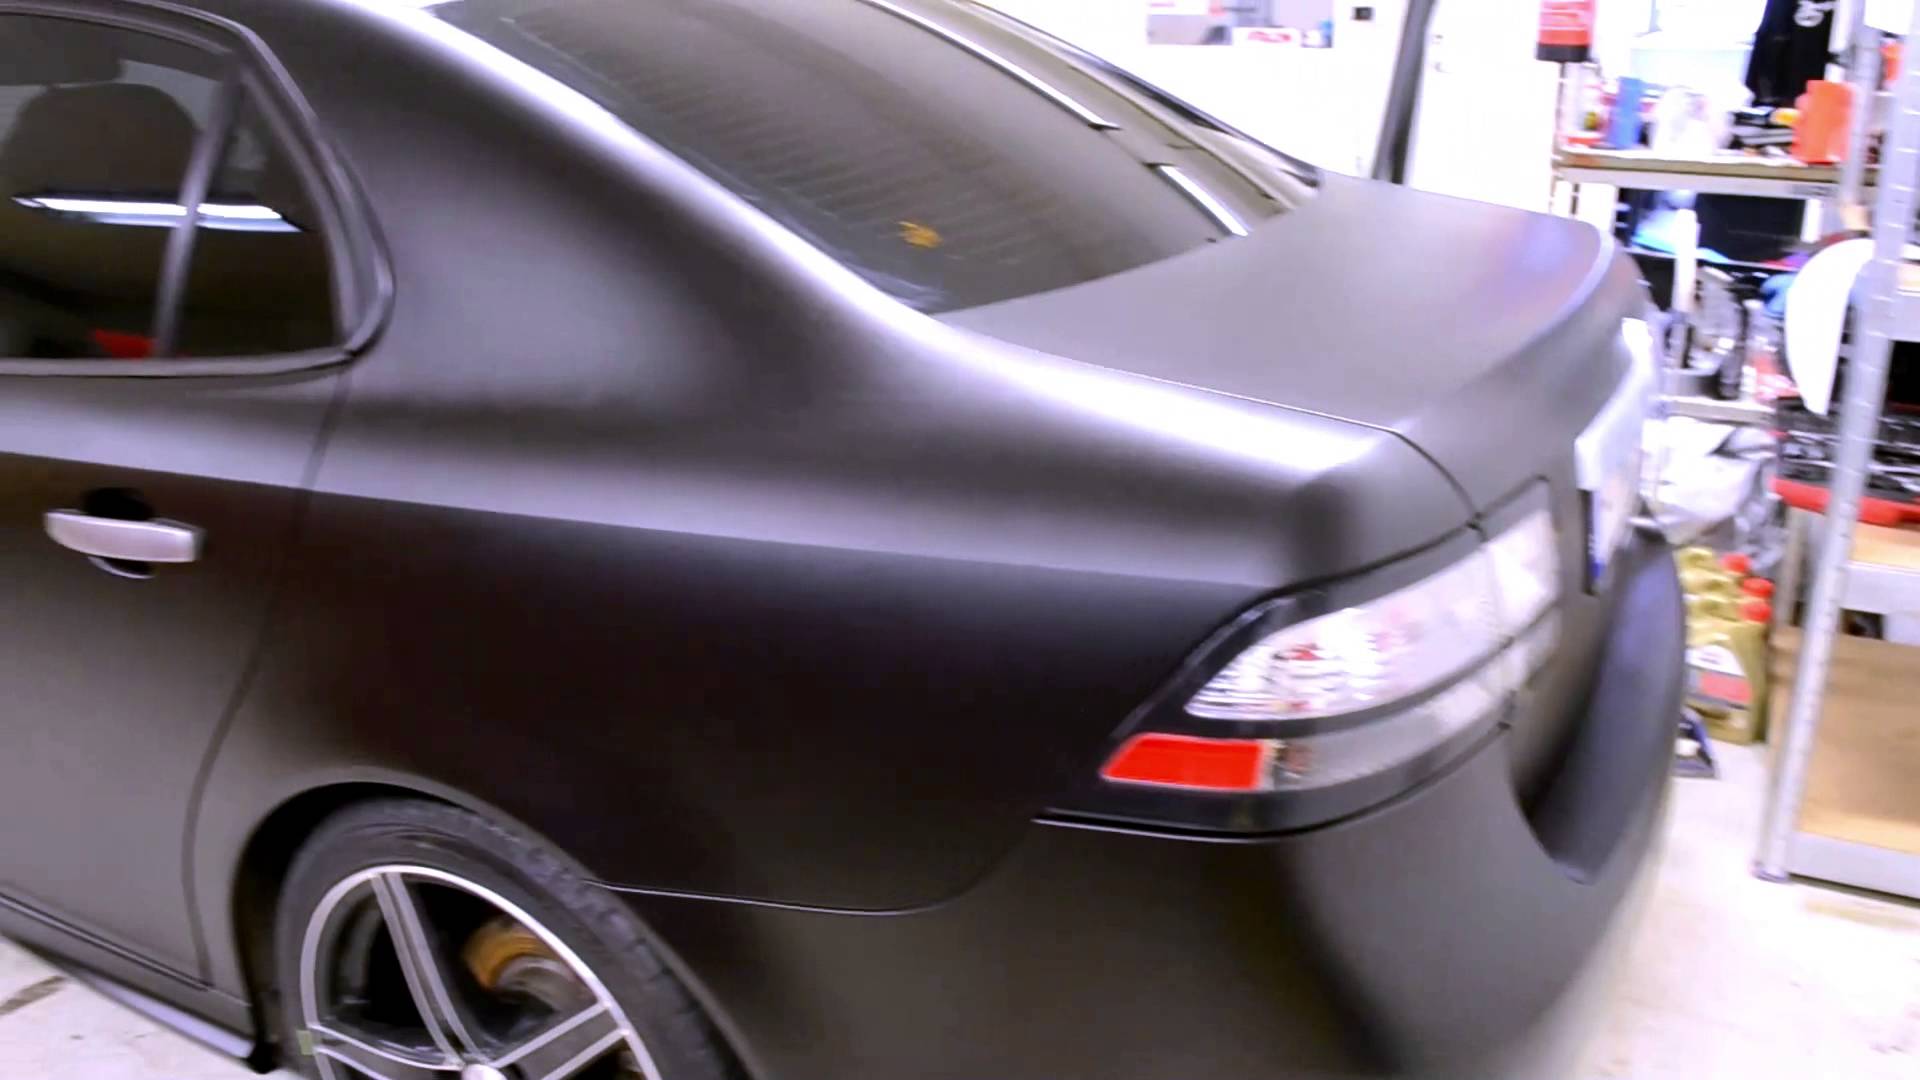 Saab 9 3 wrapped and tinted by DG Solfilm - YouTube